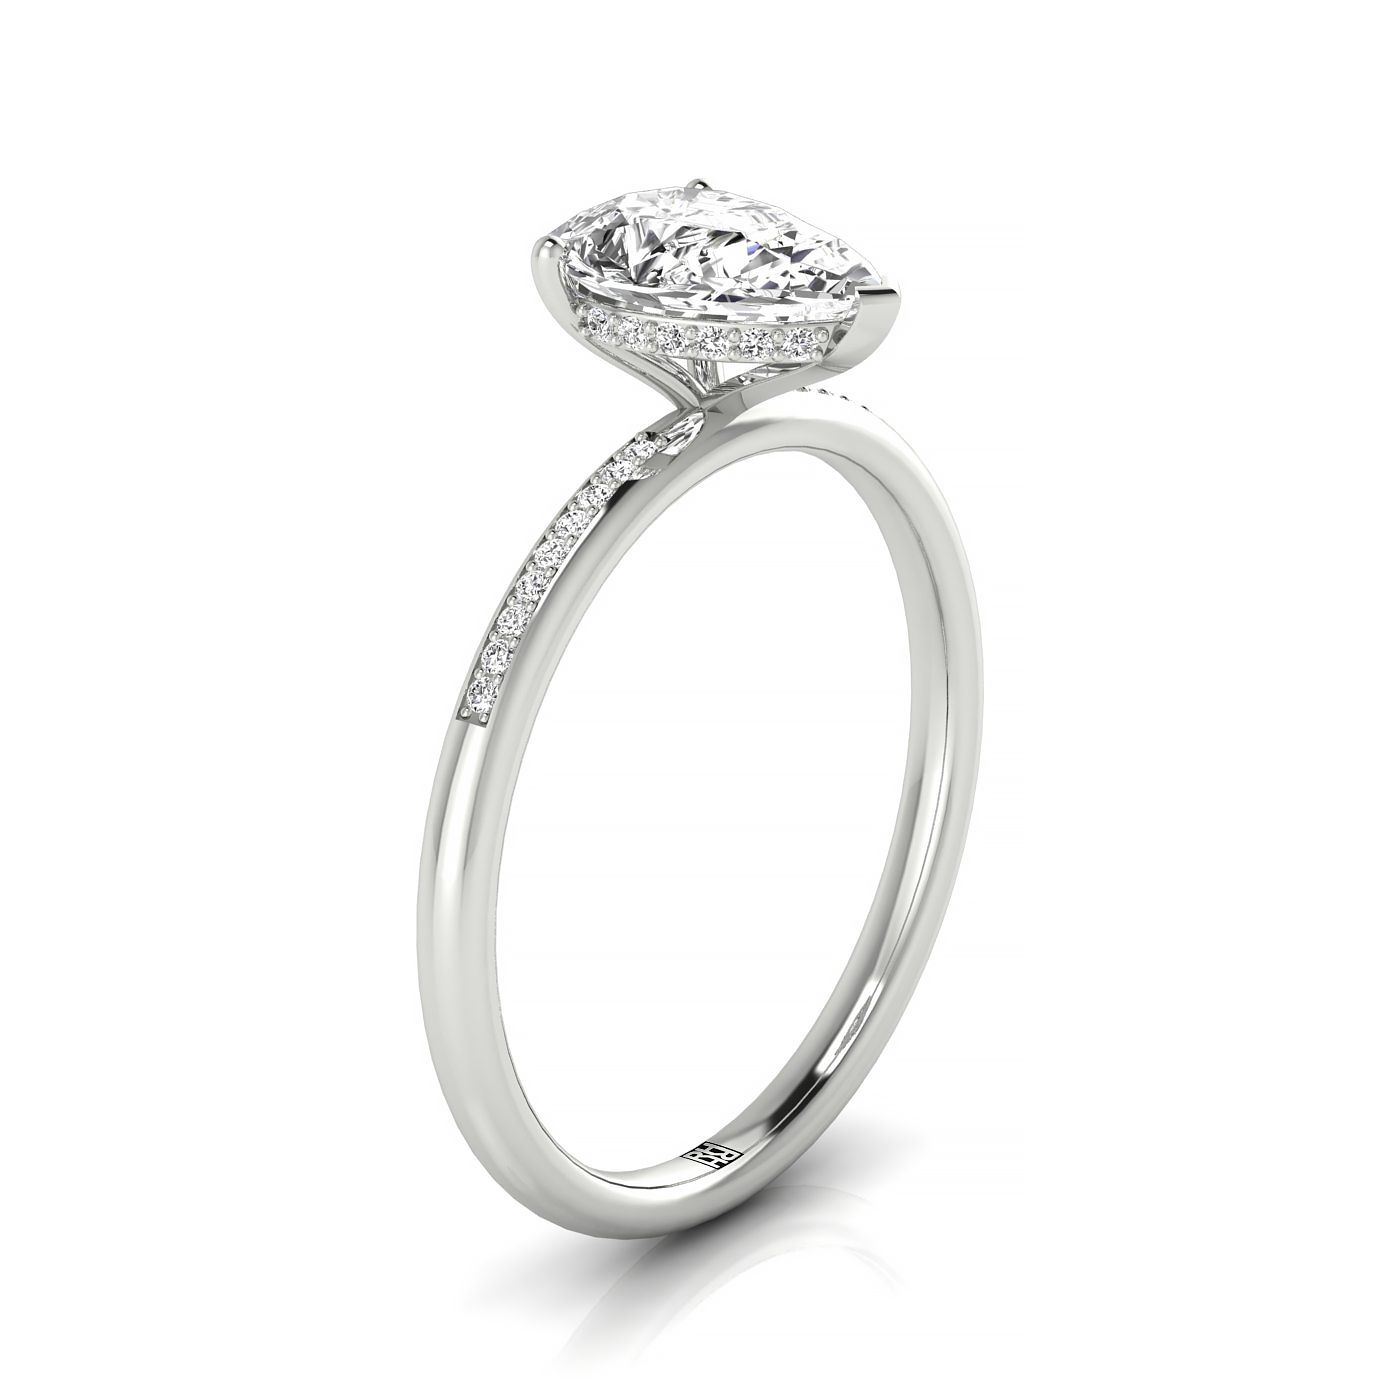 18kw Pear Engagement Ring With High Hidden Halo With 35 Prong Set Round Diamonds